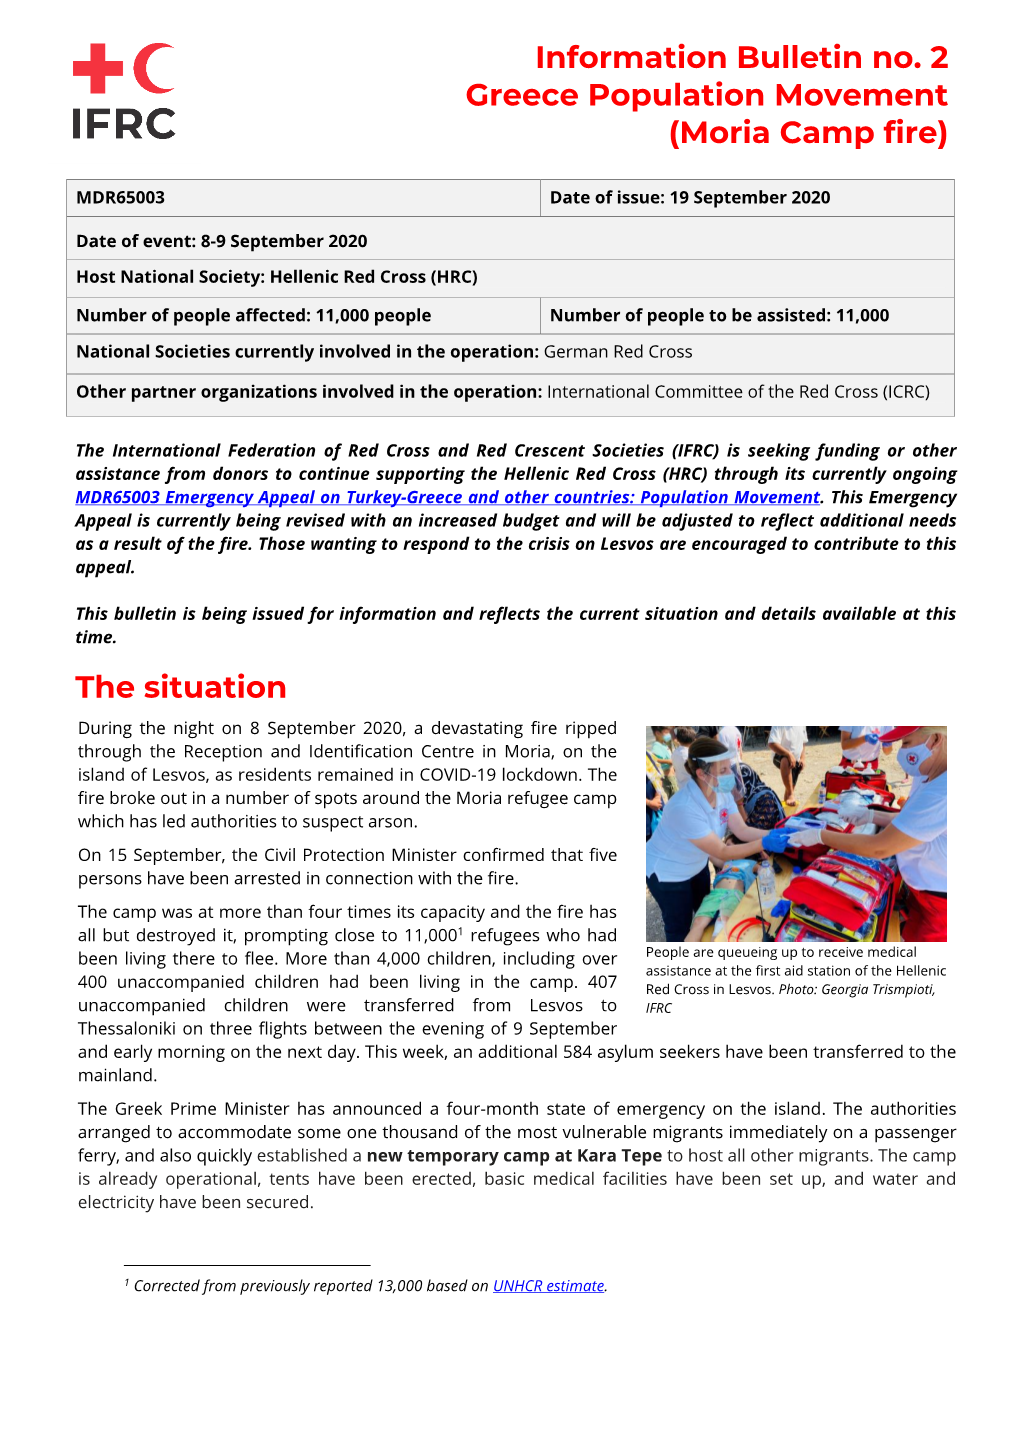 The Situation Information Bulletin No. 2 Greece Population Movement